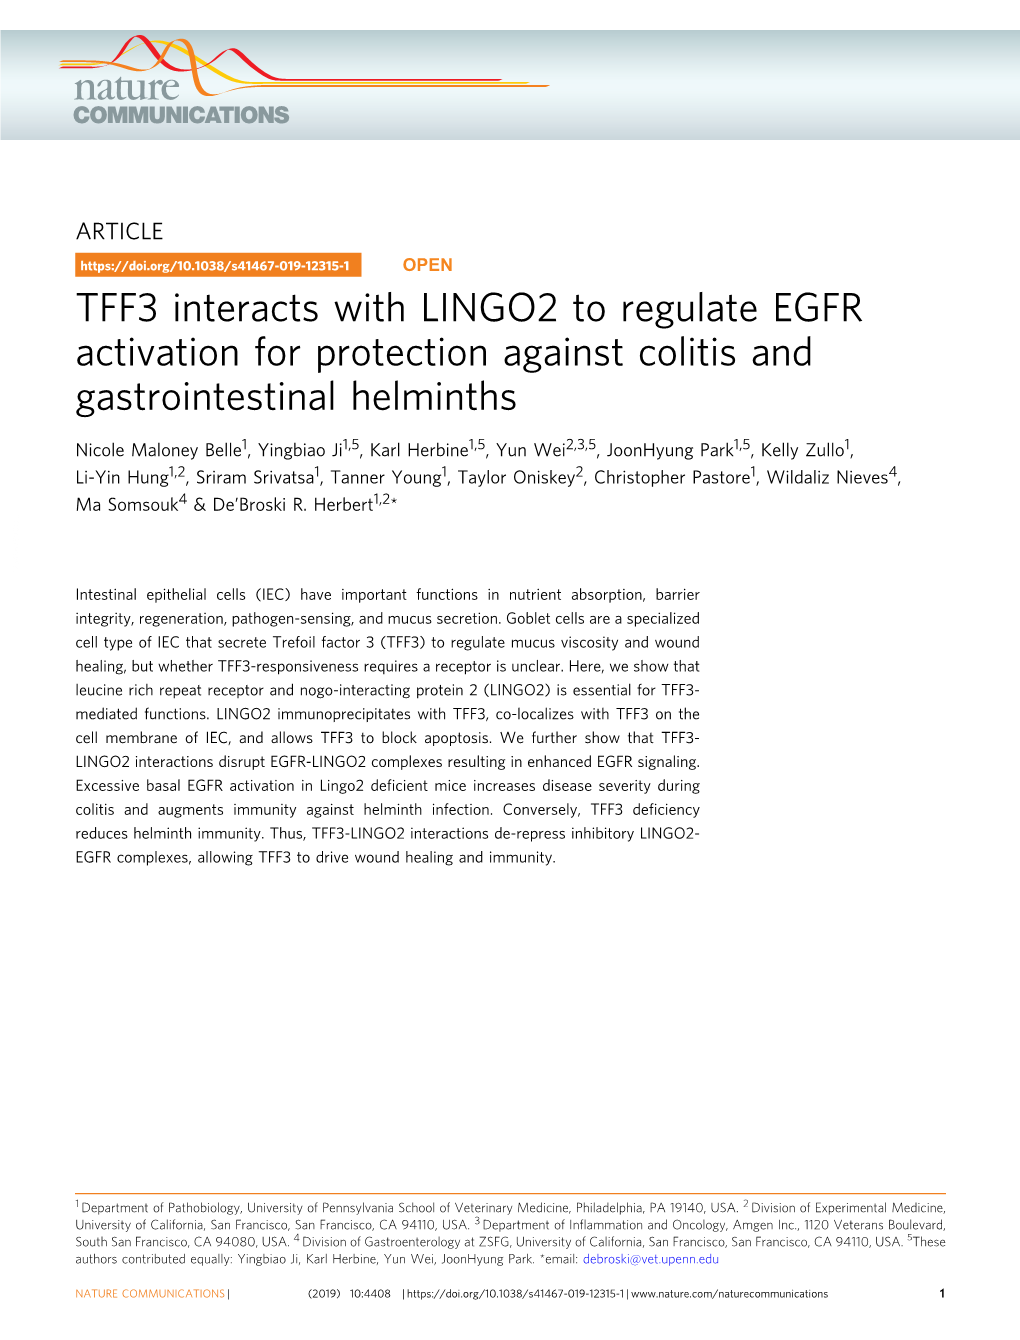 TFF3 Interacts with LINGO2 to Regulate EGFR Activation for Protection Against Colitis and Gastrointestinal Helminths